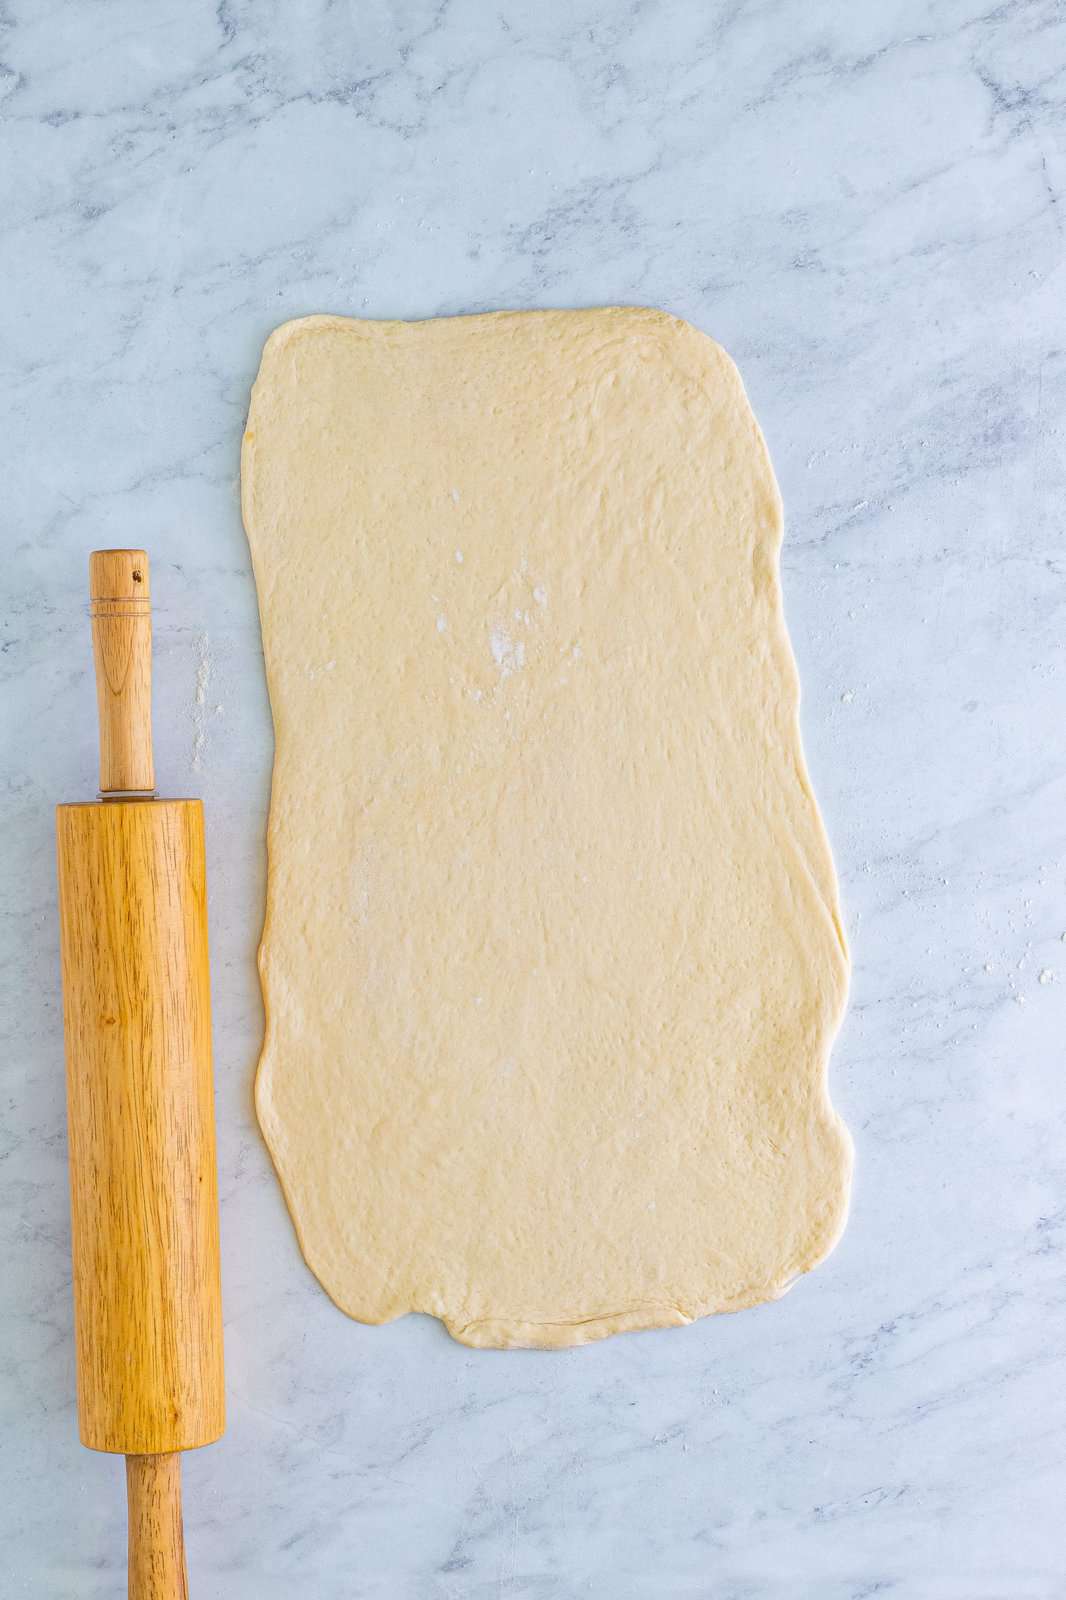 A rolling pin next to a rolled out piece of pizza dough.